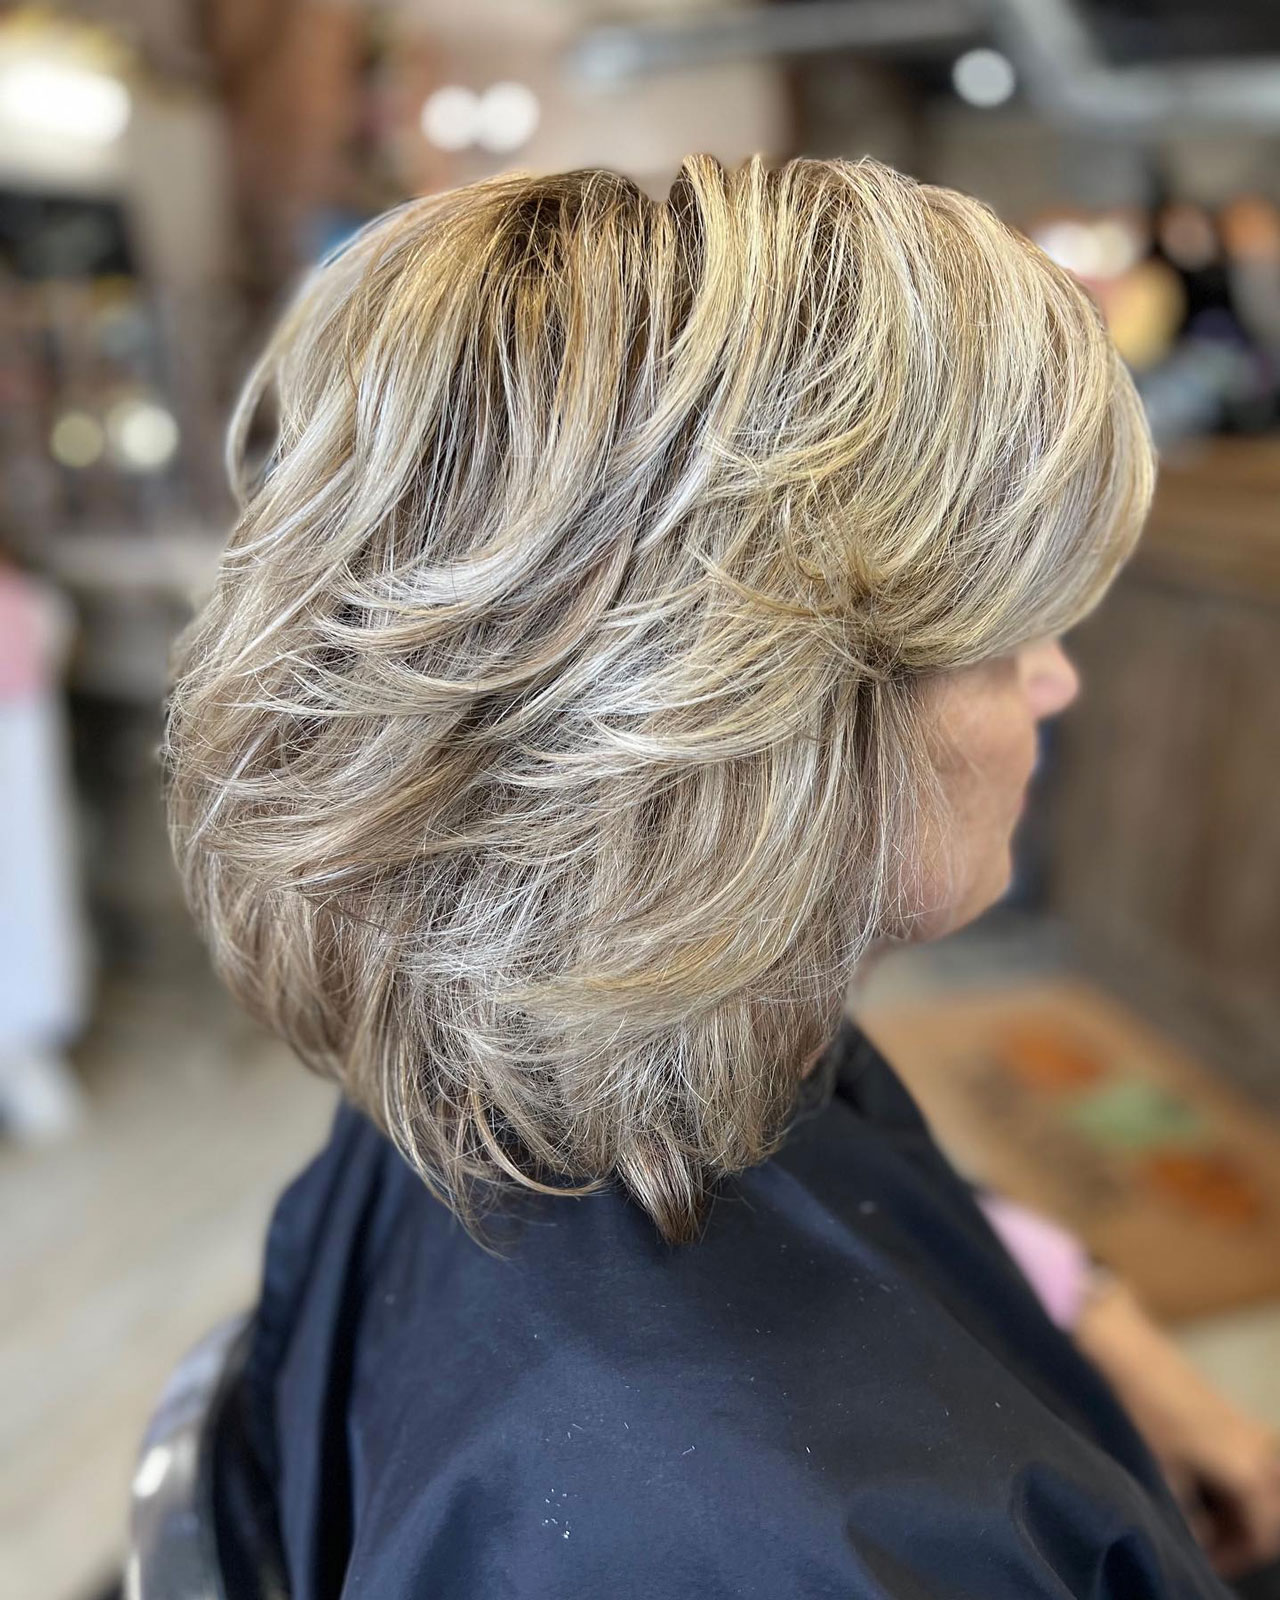 Stylists Share The 4 Best Shoulder-Length Hairstyles For Women Over 40 ...